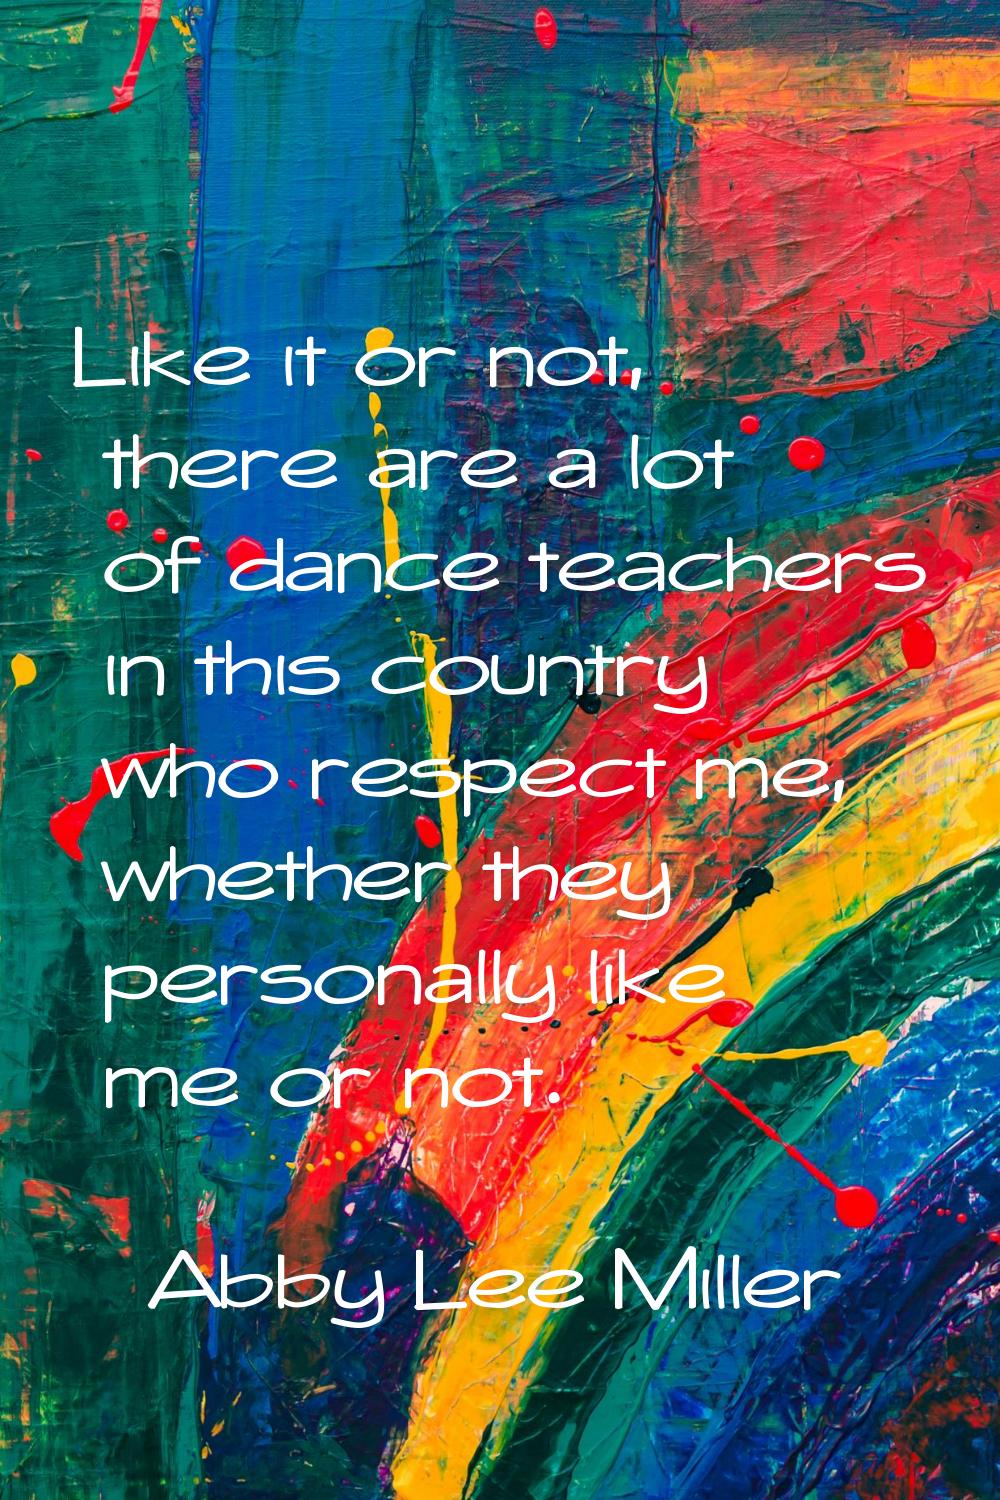 Like it or not, there are a lot of dance teachers in this country who respect me, whether they pers